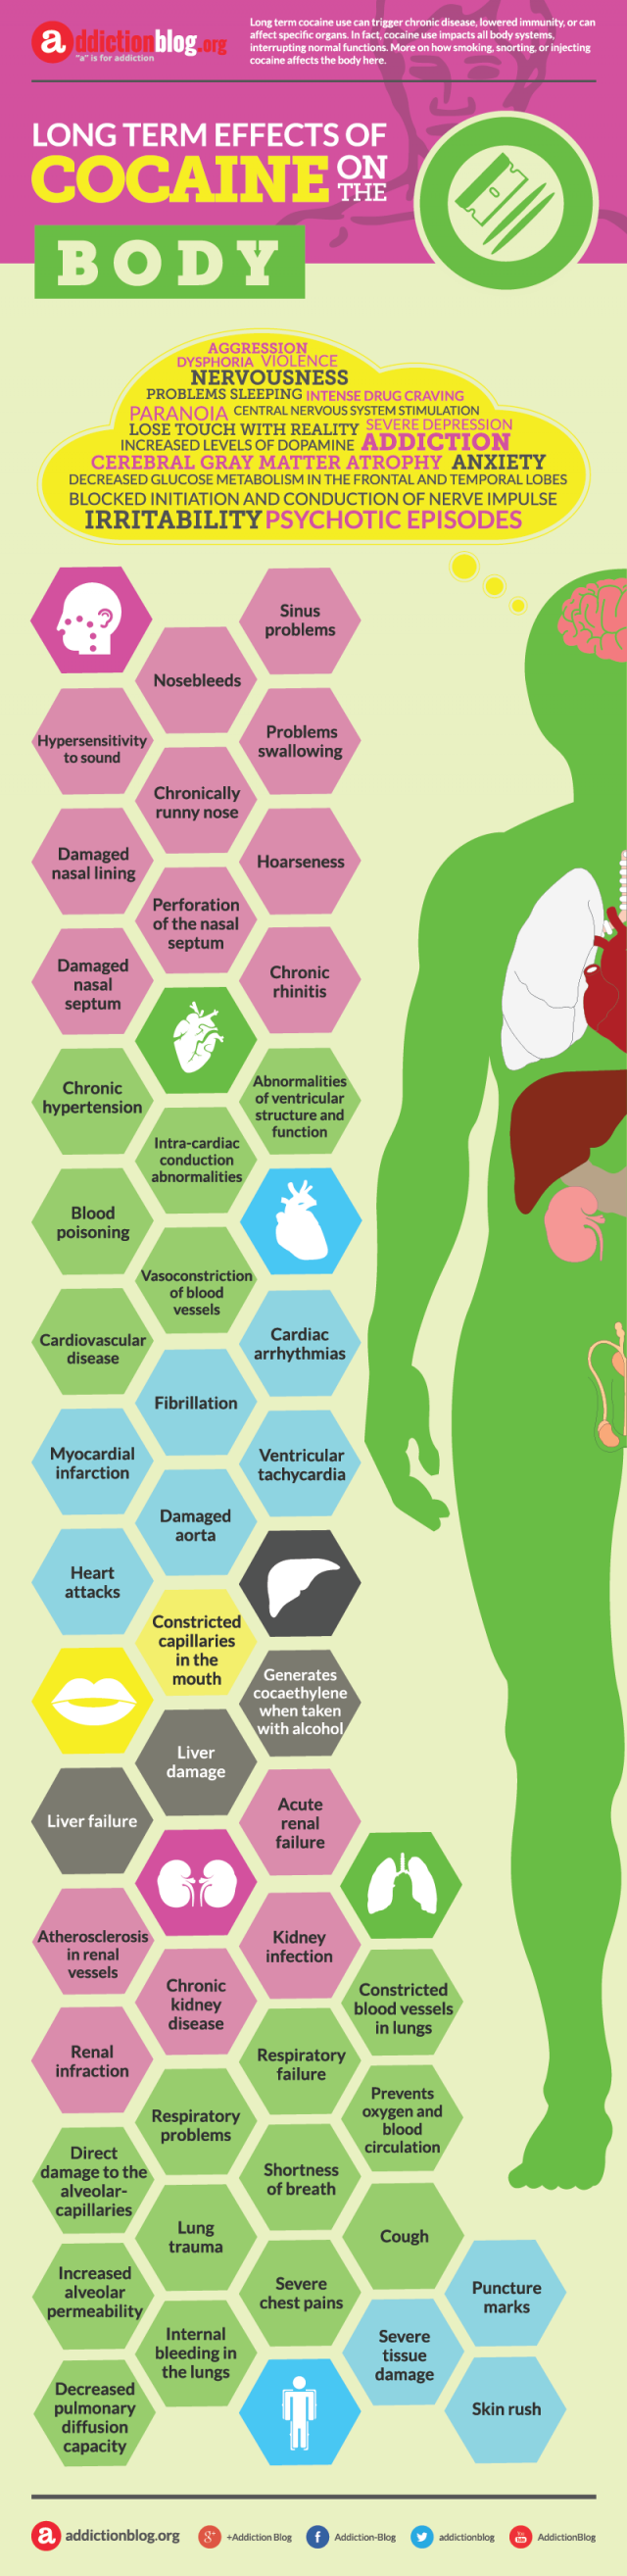 Long term effects of cocaine on the body (INFOGRAPHIC)